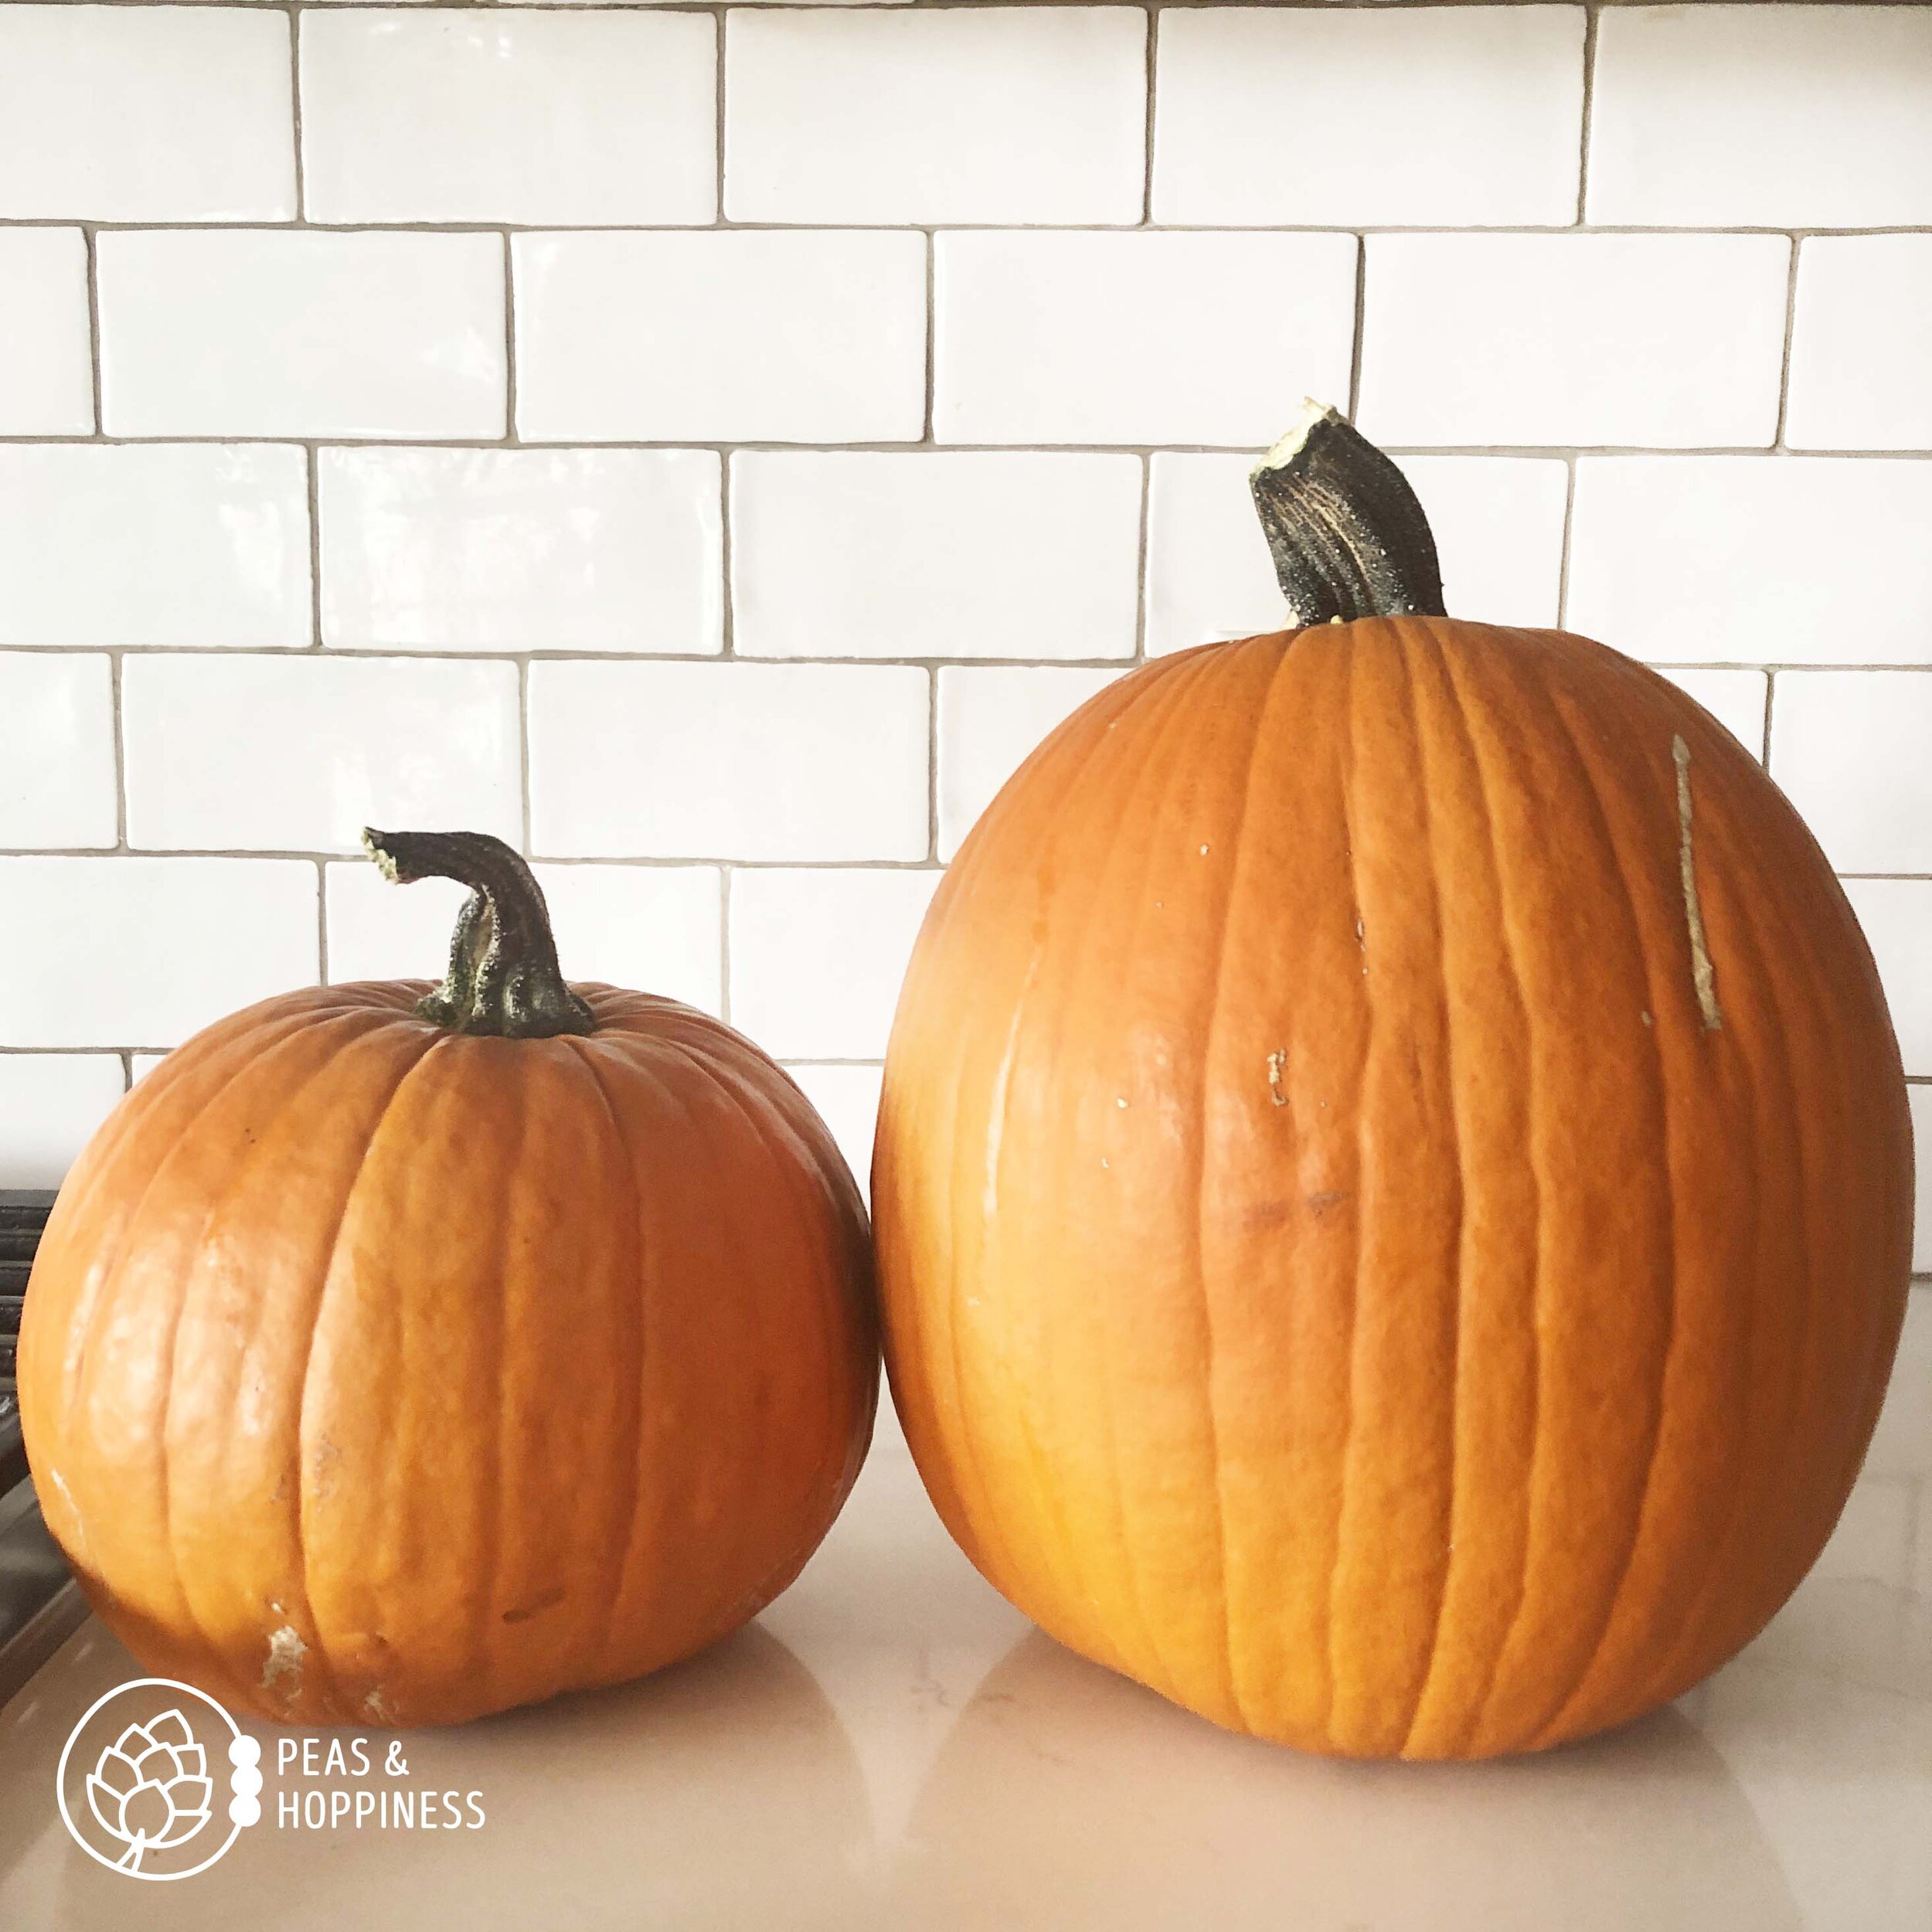 The pumpkin on the left is a pie pumpkin, which is good for cooking &amp; eating. The one on the right is better for carving and has less flesh inside so isn’t as good for eating. Learn more about pumpkins